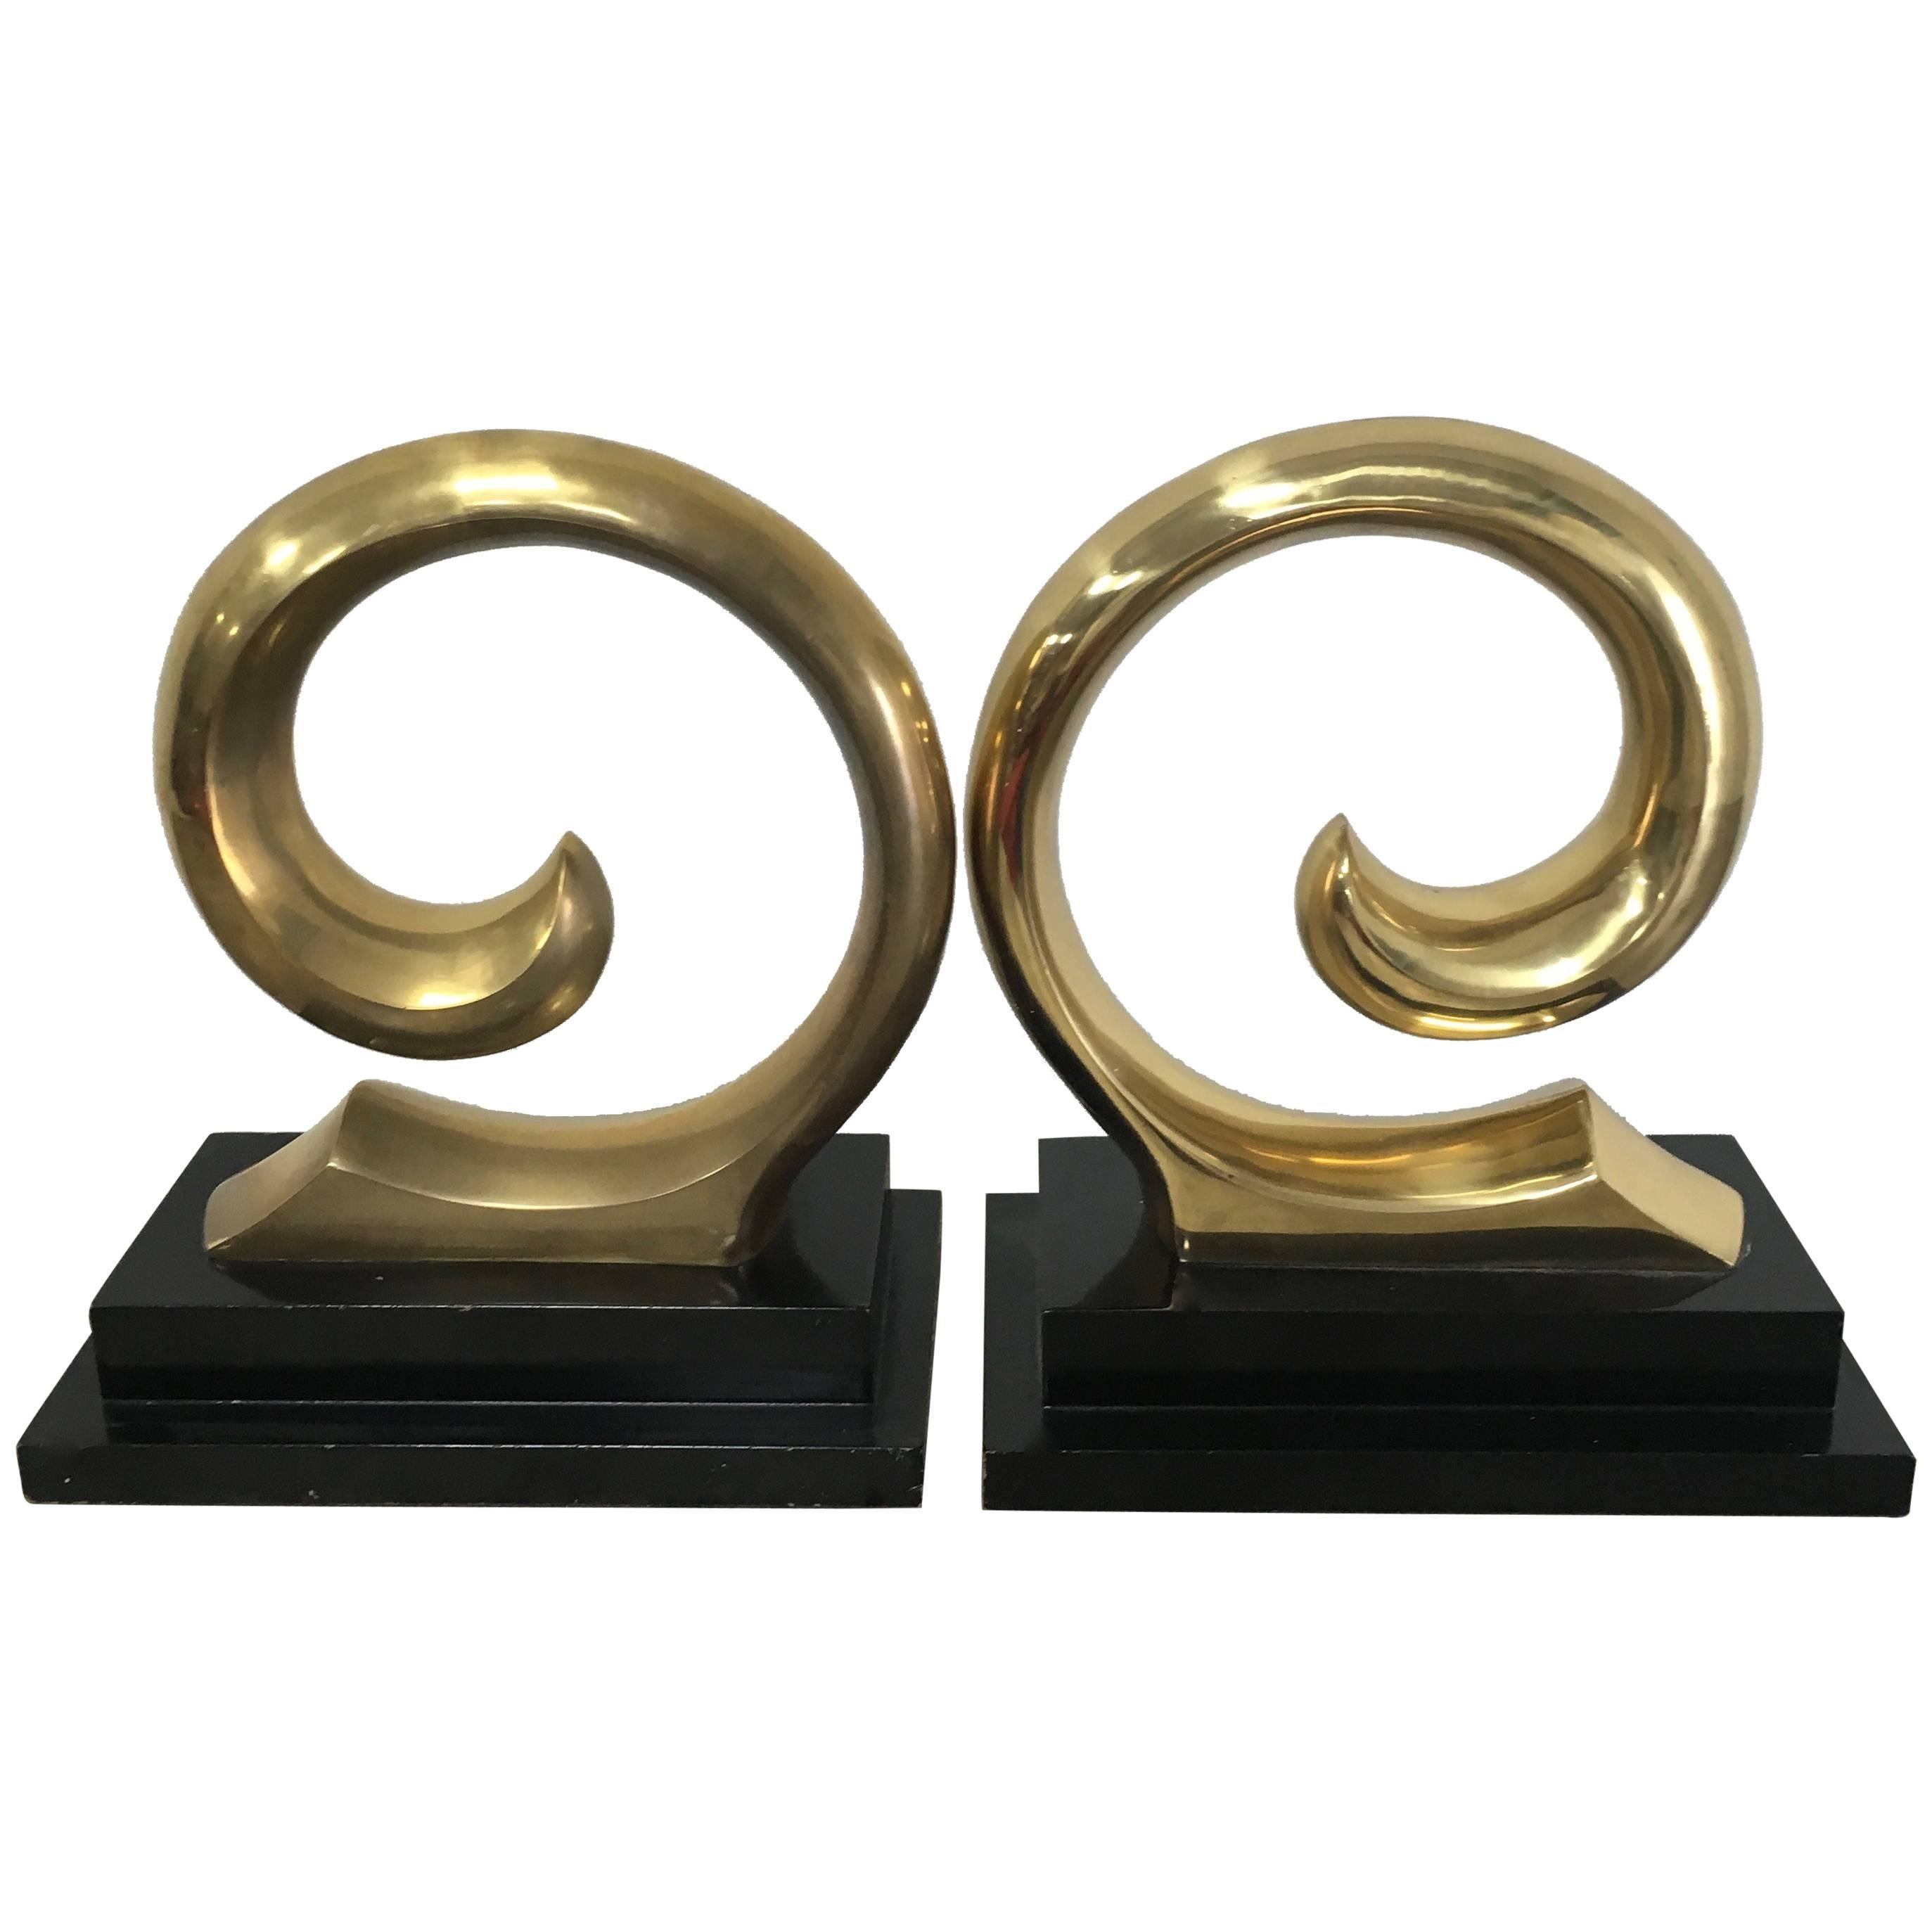 Monumental Pair of Pierre Cardin Brass Bookends